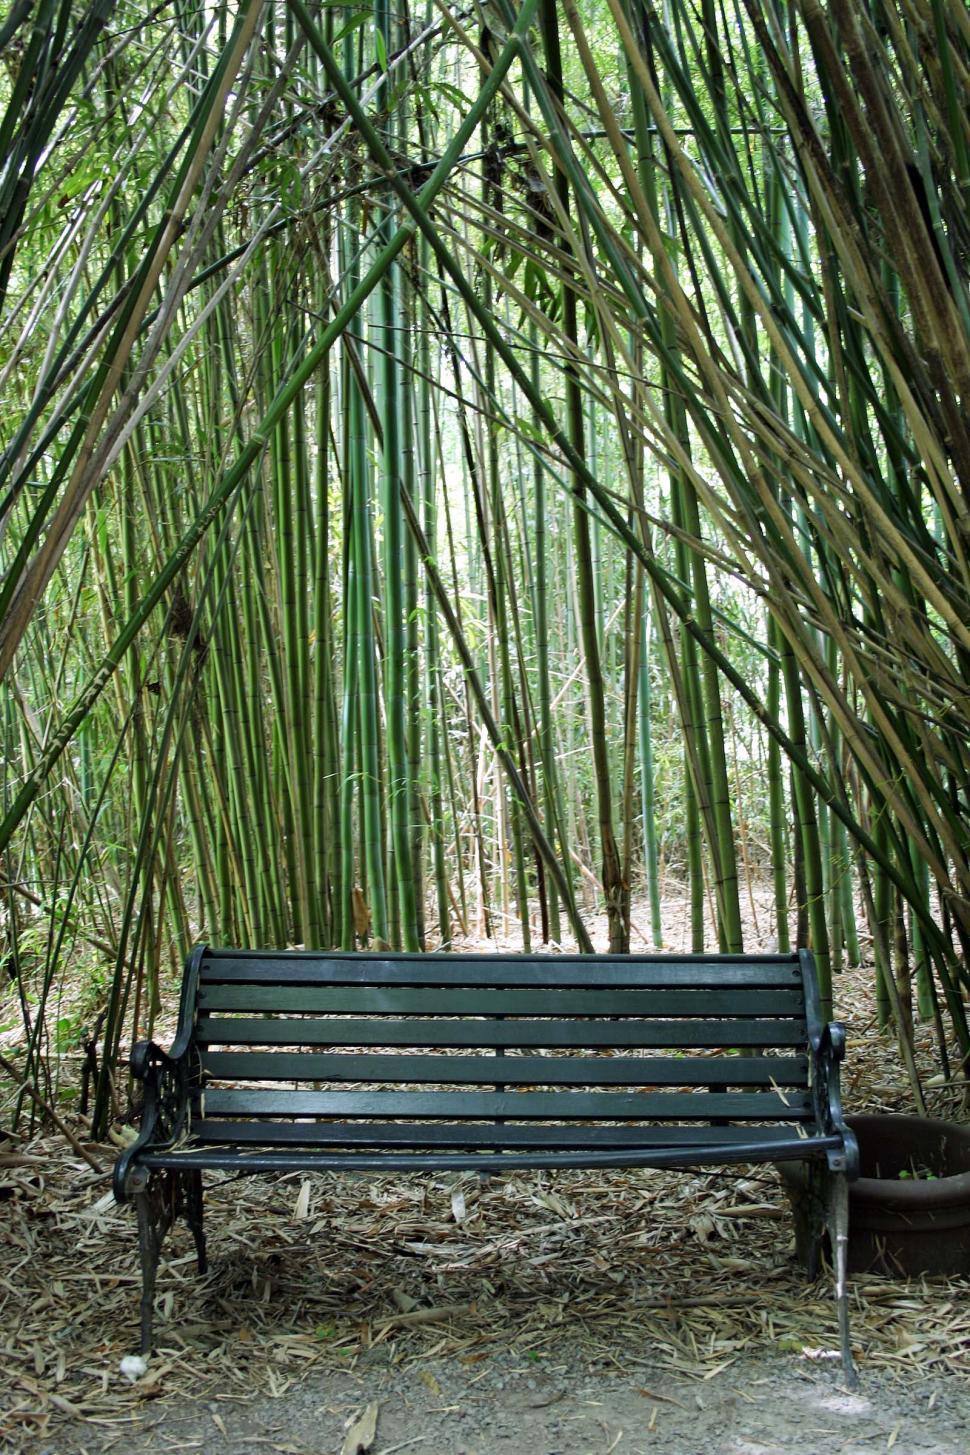 Free Image of Bench in Bamboo Forest 